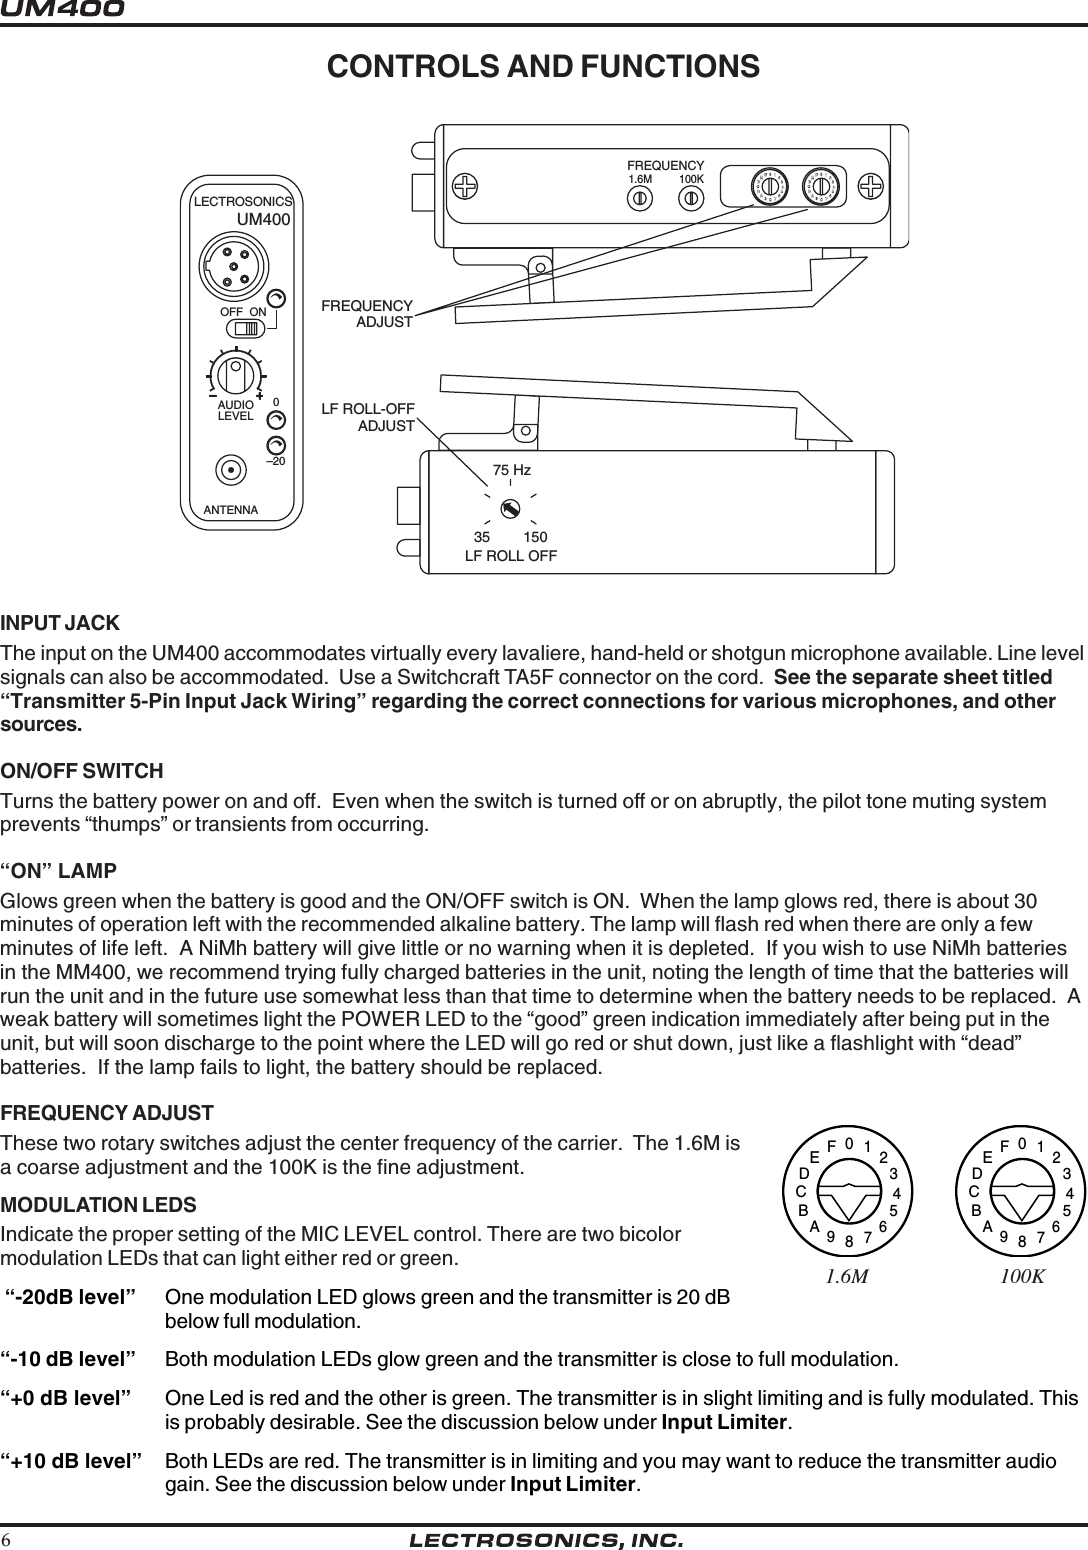 6CONTROLS AND FUNCTIONSINPUT JACKThe input on the UM400 accommodates virtually every lavaliere, hand-held or shotgun microphone available. Line levelsignals can also be accommodated.  Use a Switchcraft TA5F connector on the cord.  See the separate sheet titled“Transmitter 5-Pin Input Jack Wiring” regarding the correct connections for various microphones, and othersources.ON/OFF SWITCHTurns the battery power on and off.  Even when the switch is turned off or on abruptly, the pilot tone muting systemprevents “thumps” or transients from occurring.“ON” LAMPGlows green when the battery is good and the ON/OFF switch is ON.  When the lamp glows red, there is about 30minutes of operation left with the recommended alkaline battery. The lamp will flash red when there are only a fewminutes of life left.  A NiMh battery will give little or no warning when it is depleted.  If you wish to use NiMh batteriesin the MM400, we recommend trying fully charged batteries in the unit, noting the length of time that the batteries willrun the unit and in the future use somewhat less than that time to determine when the battery needs to be replaced.  Aweak battery will sometimes light the POWER LED to the “good” green indication immediately after being put in theunit, but will soon discharge to the point where the LED will go red or shut down, just like a flashlight with “dead”batteries.  If the lamp fails to light, the battery should be replaced.FREQUENCY ADJUSTThese two rotary switches adjust the center frequency of the carrier.  The 1.6M isa coarse adjustment and the 100K is the fine adjustment.LF ROLL-OFFADJUSTFREQUENCY1.6M 100KFREQUENCYADJUSTANTENNAOFF  ON–200LECTROSONICSLEVELAUDIO0123456789ABCDEF0123456789ABCDEFLF ROLL OFF35 15075 HzUM4000123456789ABCDEF0123456789ABCDEF1.6M                           100KMODULATION LEDSIndicate the proper setting of the MIC LEVEL control. There are two bicolormodulation LEDs that can light either red or green. “-20dB level” One modulation LED glows green and the transmitter is 20 dBbelow full modulation.“-10 dB level” Both modulation LEDs glow green and the transmitter is close to full modulation.“+0 dB level” One Led is red and the other is green. The transmitter is in slight limiting and is fully modulated. Thisis probably desirable. See the discussion below under Input Limiter.“+10 dB level” Both LEDs are red. The transmitter is in limiting and you may want to reduce the transmitter audiogain. See the discussion below under Input Limiter.